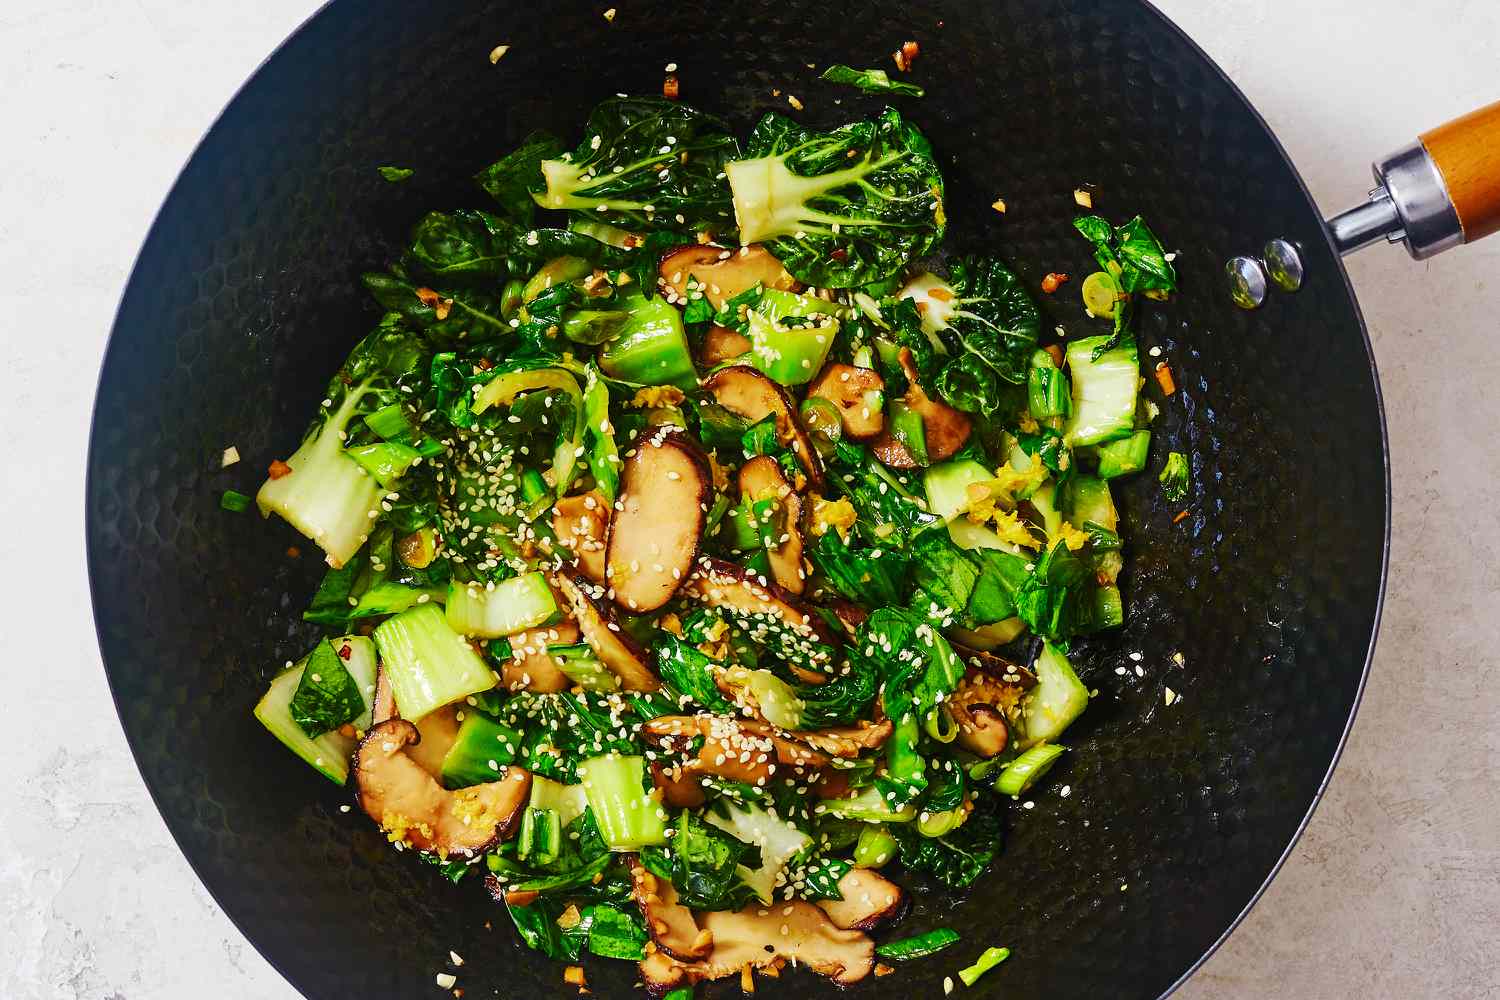 Bok choy and shiitake mushroom stir fry in a wok with sesame oil and seeds